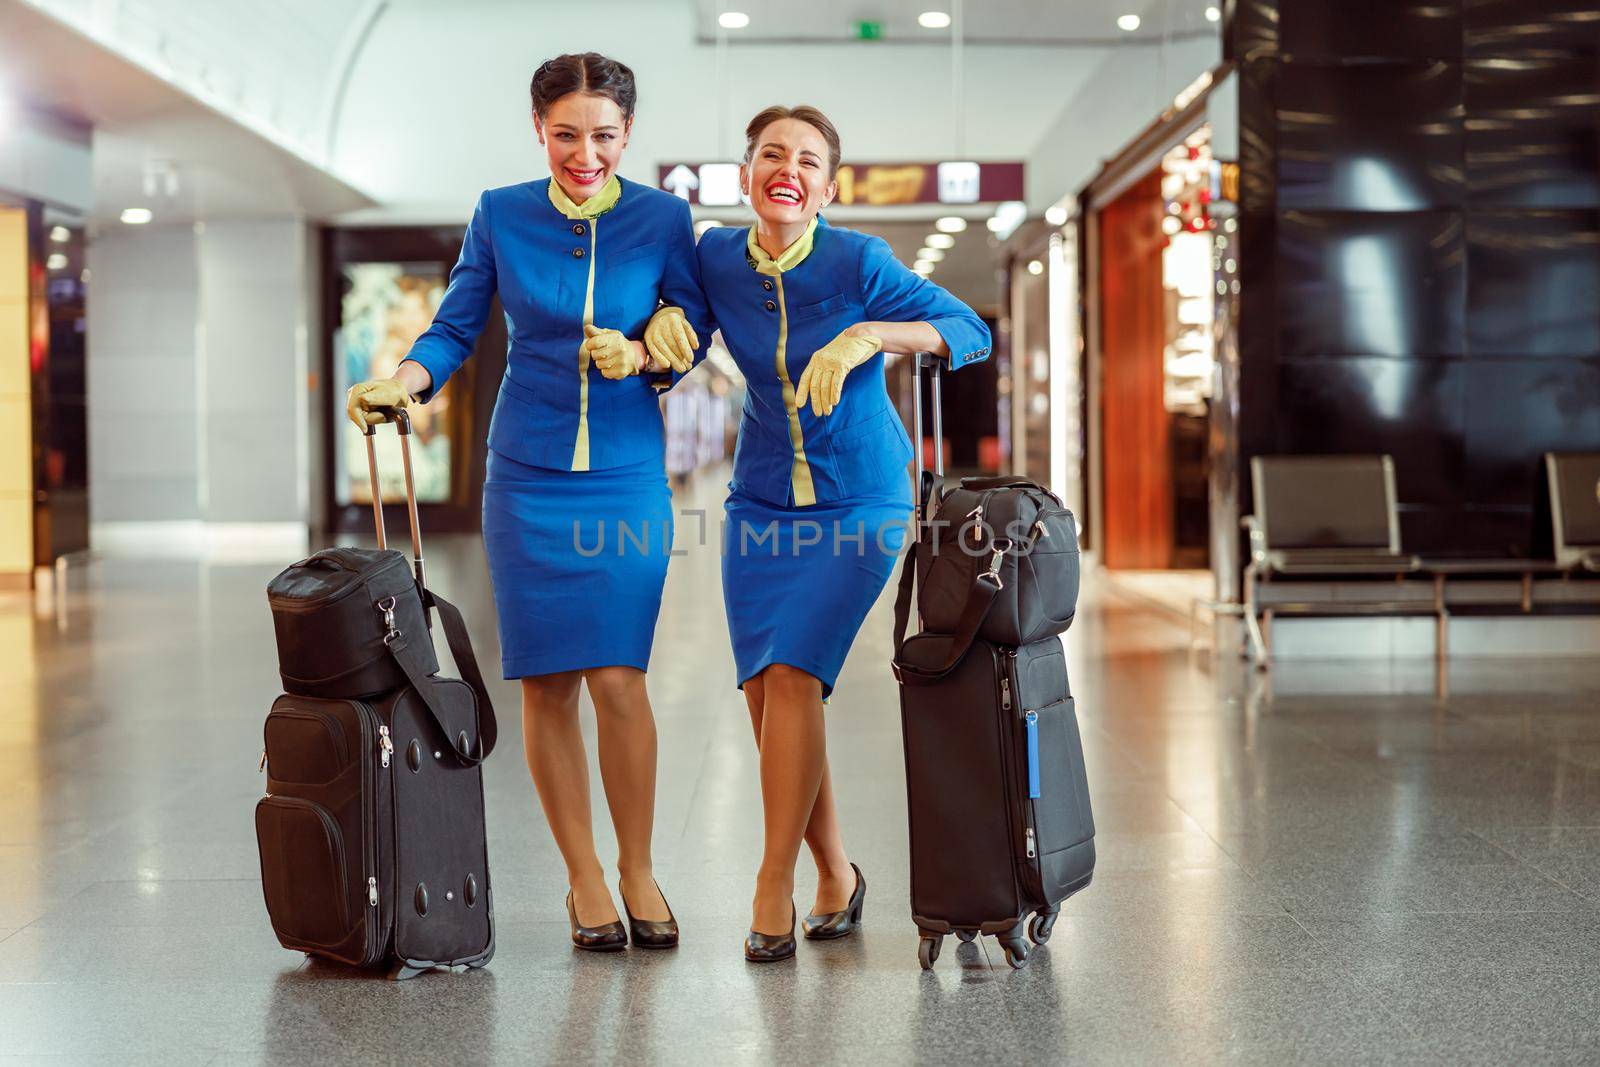 Cheerful stewardesses with travel bags standing in airport terminal by Yaroslav_astakhov